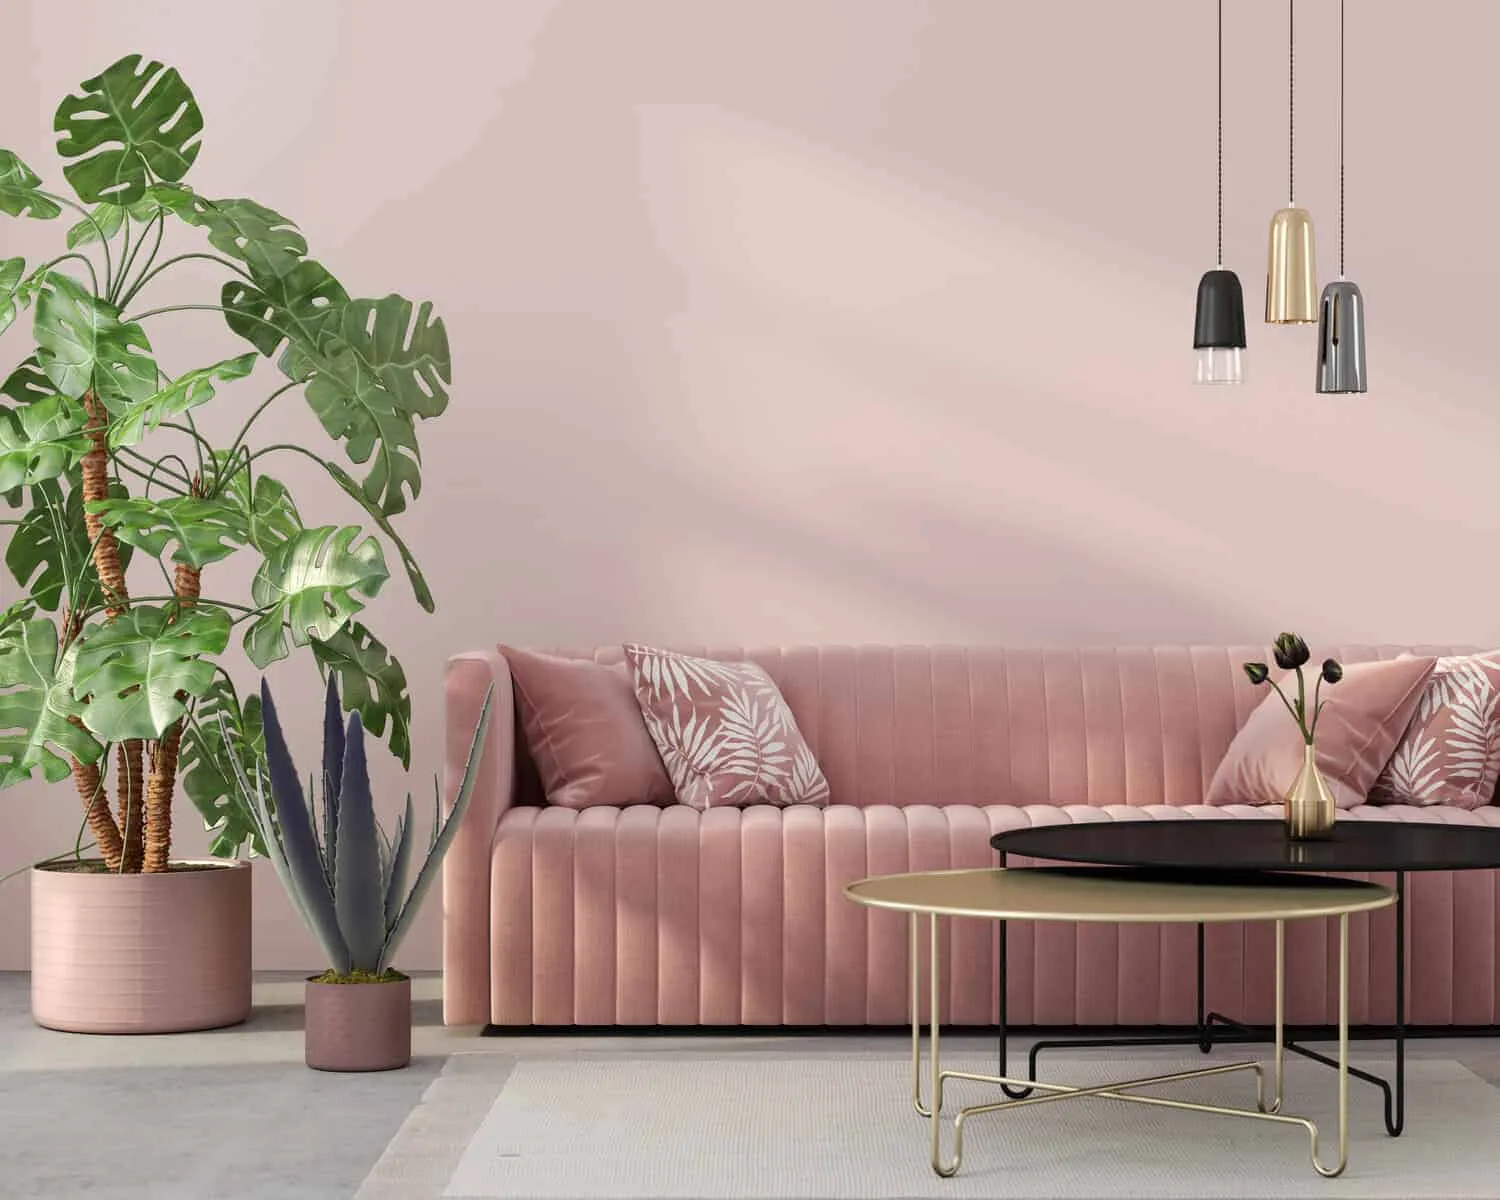 Pastel pink colour walls with pastel pink sofa for this home